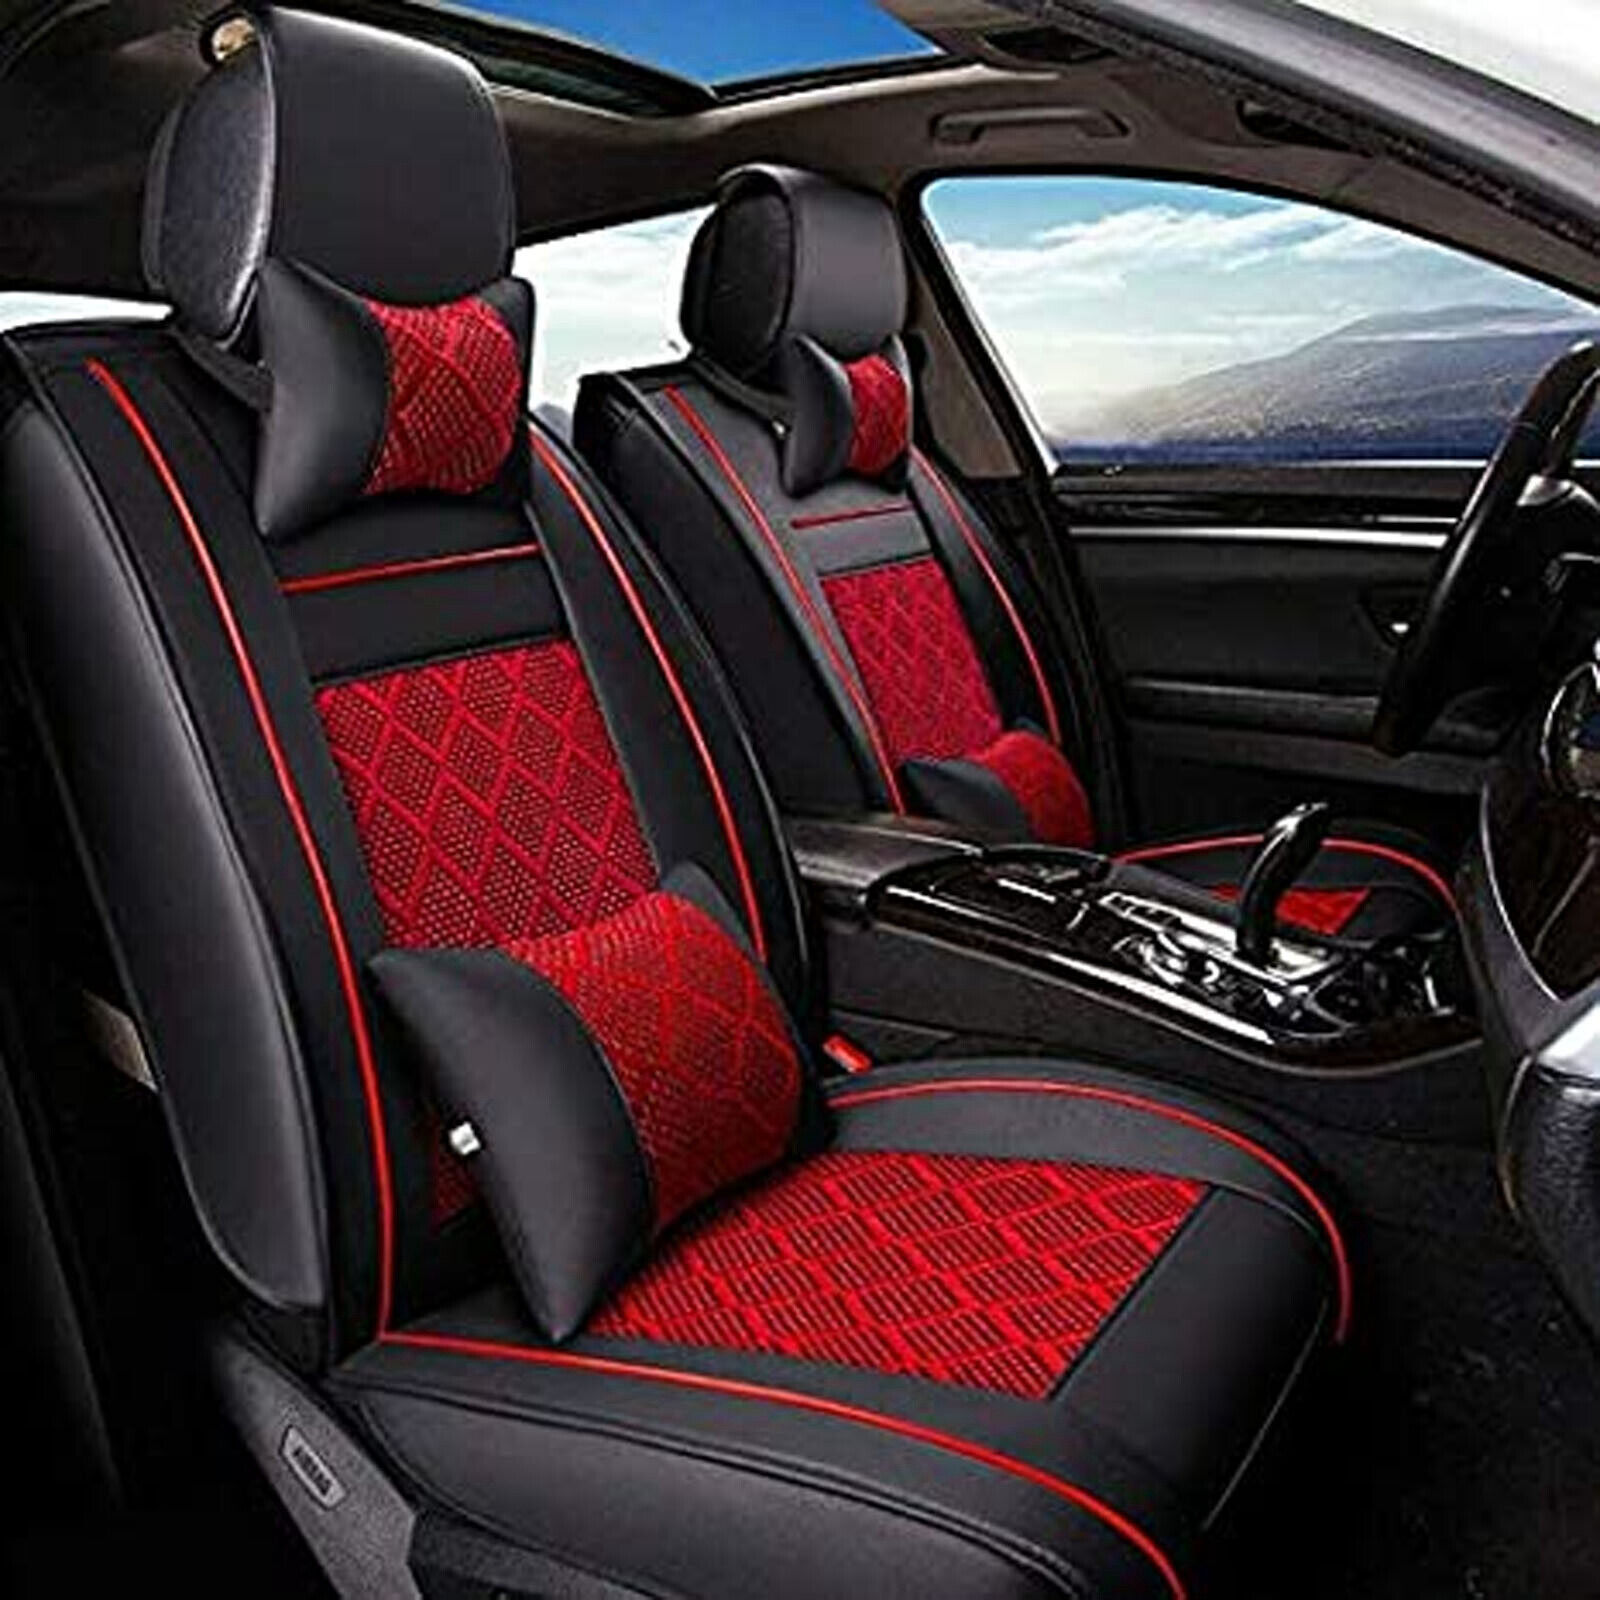 5-Seats Deluxe PU Leather Car Seat Cover Set w/Pillows SUV Front & Rear Cushions